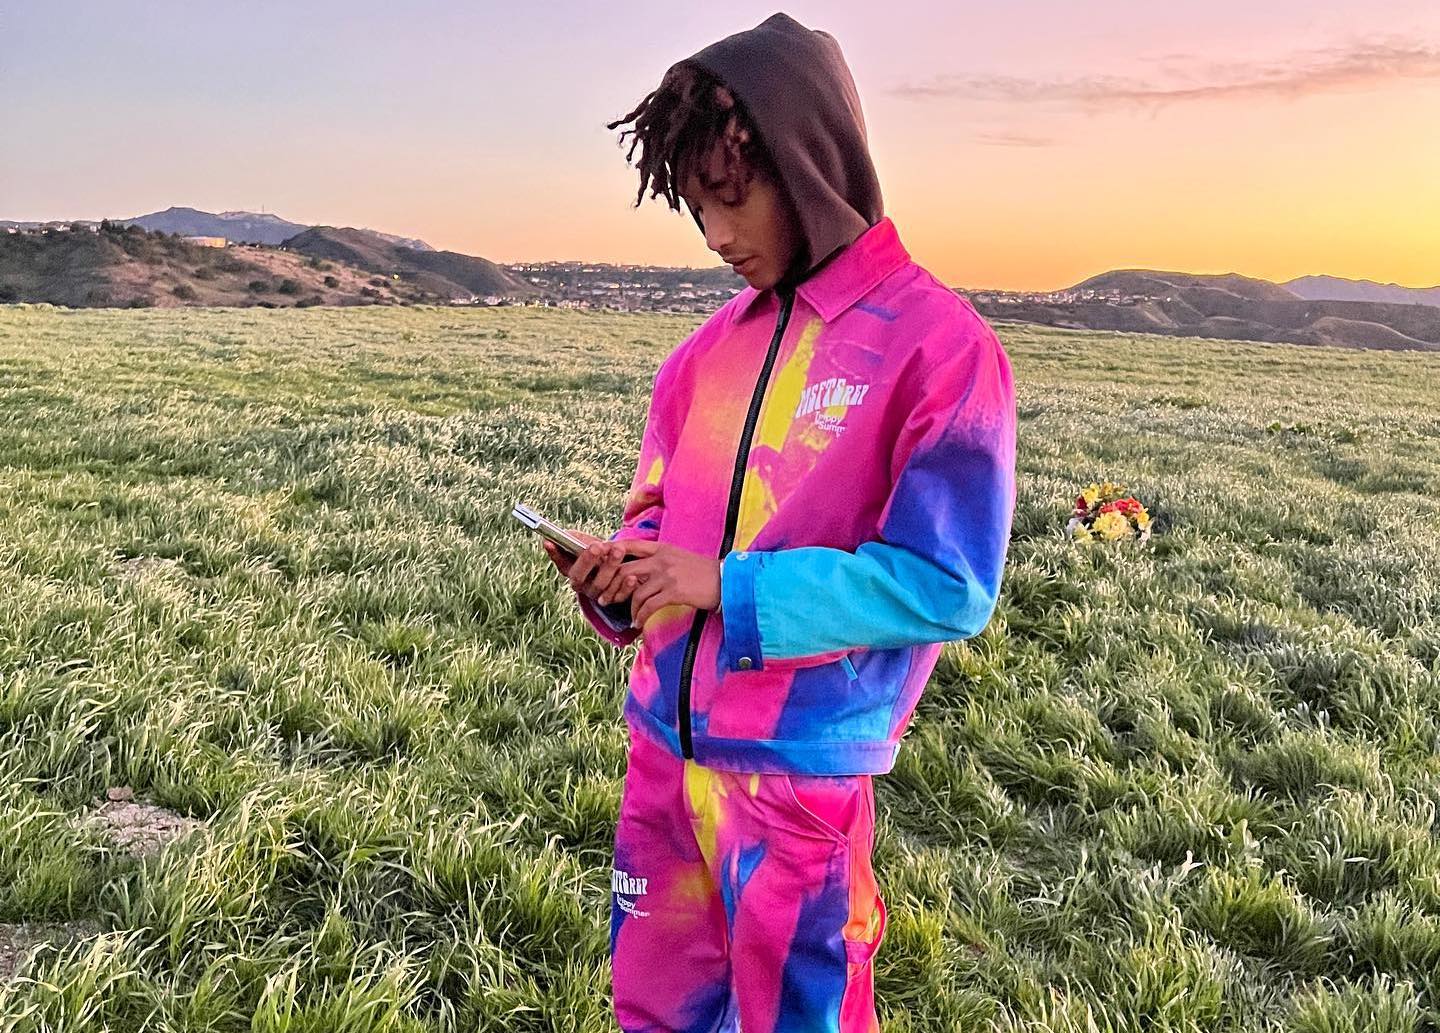 SPOTTED: Jaden Smith Catches the Sunset in Tie-Dye MSFTSrep